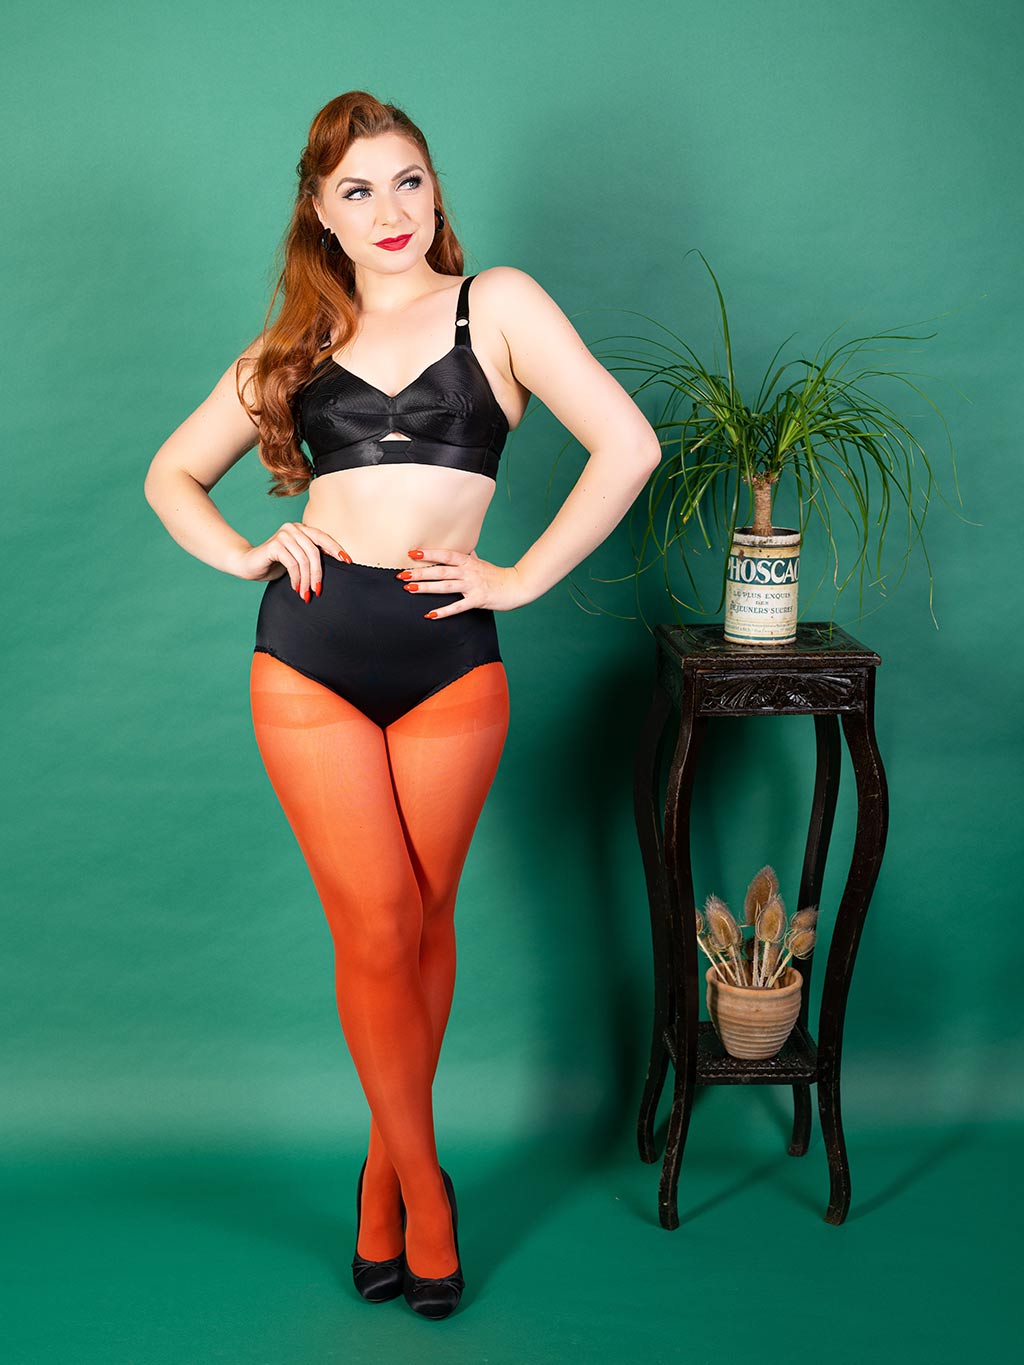 Vintage Lingerie, Reproduction 1940s and 1950s Inspired Lingerie Page 4 -  What Katie Did